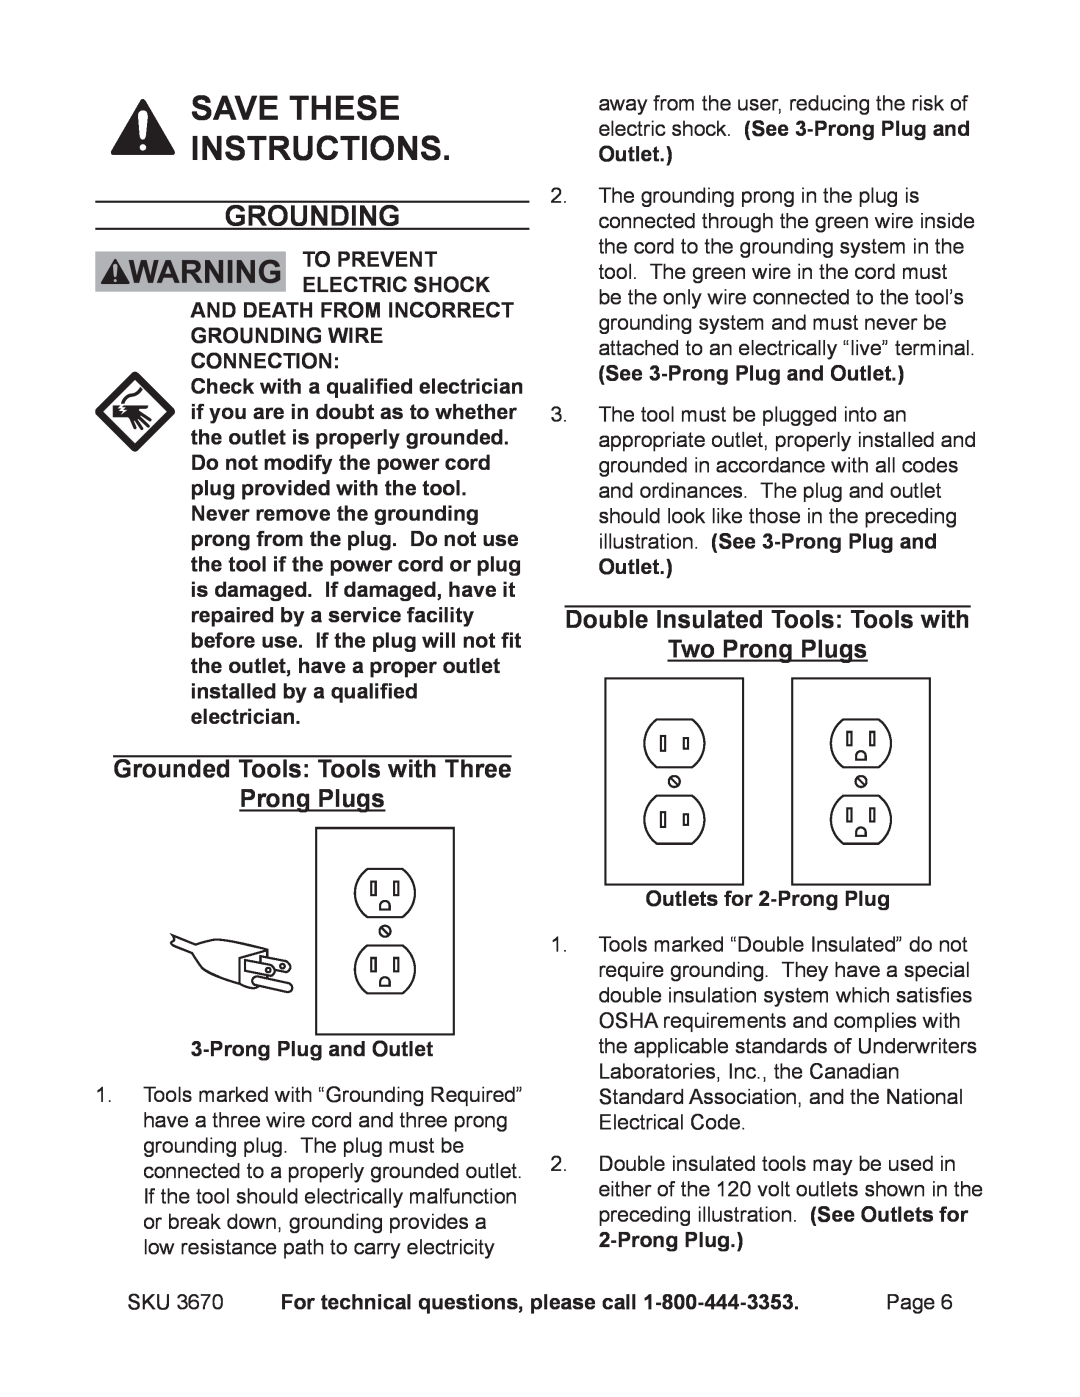 Harbor Freight Tools 3670 Save these instructions, Grounding, Double Insulated Tools Tools with Two Prong Plugs 